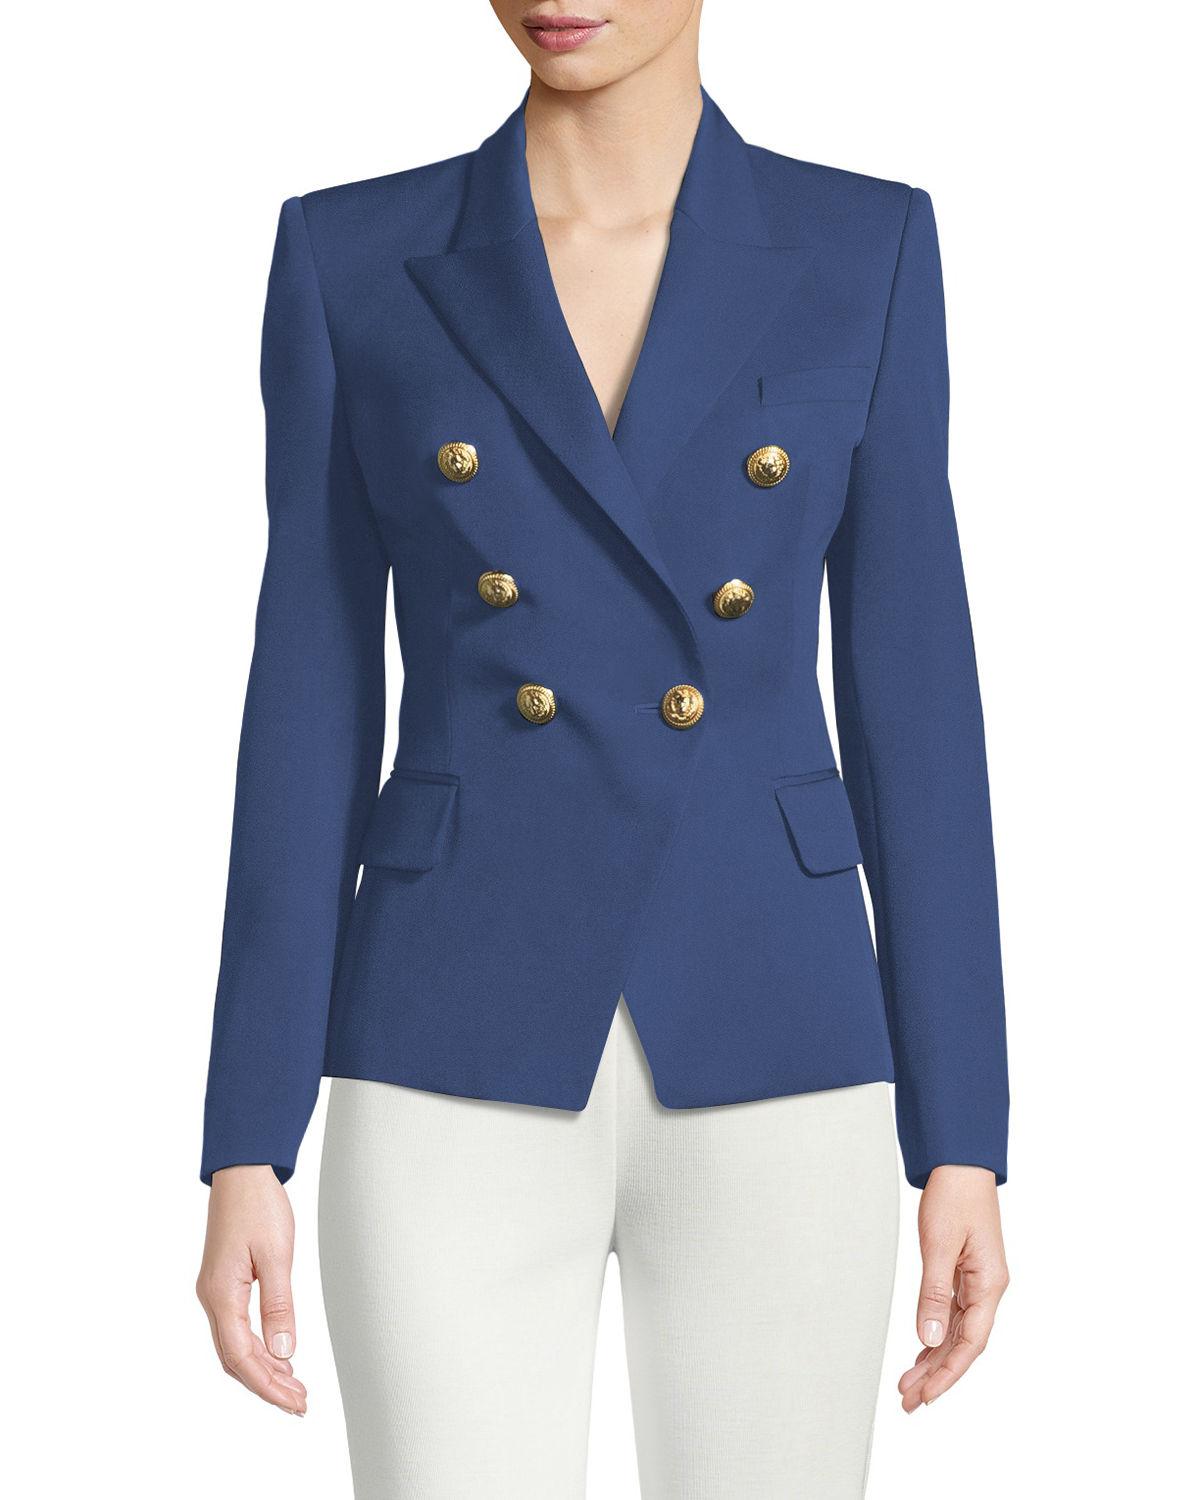 Lyst - Balmain Classic Double-breasted Wool Blazer in Blue - Save 14%